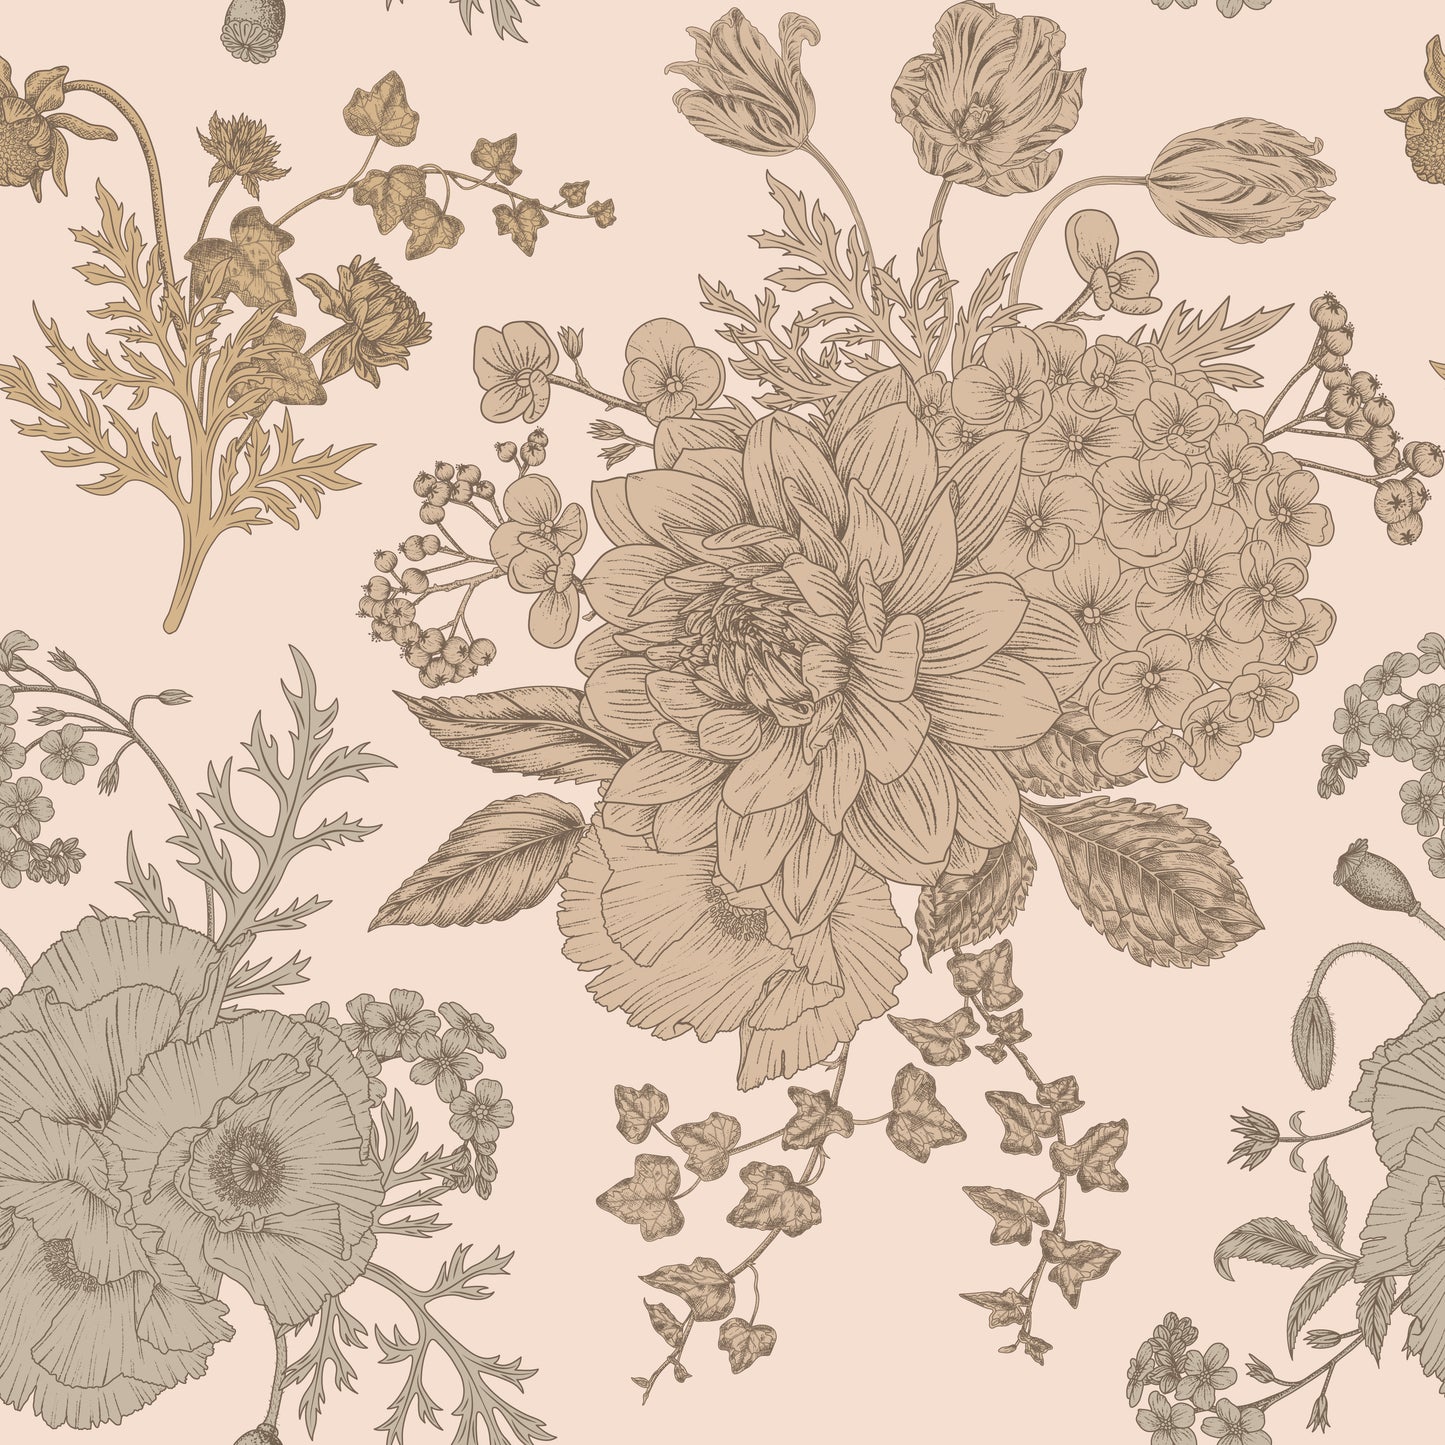 Vintage boho bouquet taupe floral bouquet print on cream background easy to install and remove peel and stick custom wallpaper available in different lengths/sizes locally created and printed in Canada wallpaper. Washable, durable, commercial grade, removable and waterproof.